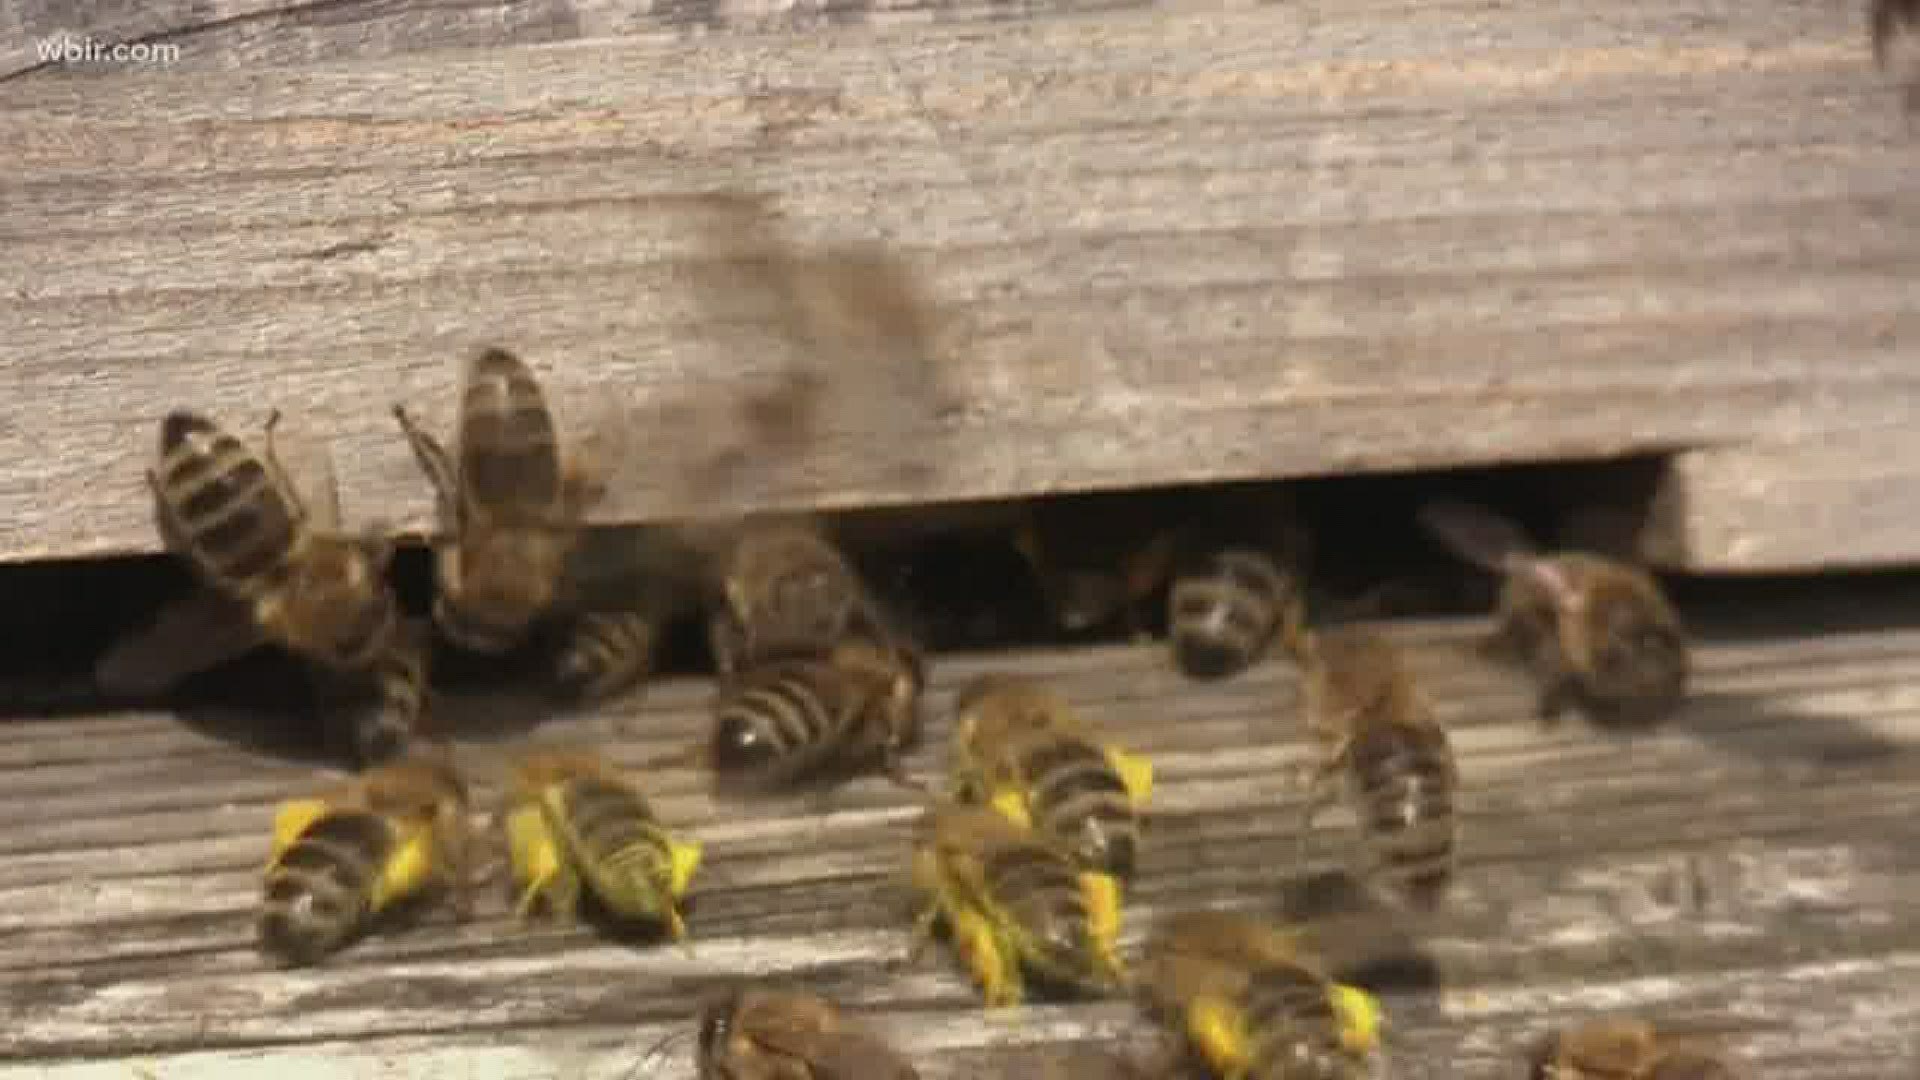 Beekeepers are urging people to call the professionals to remove those swarms safely.